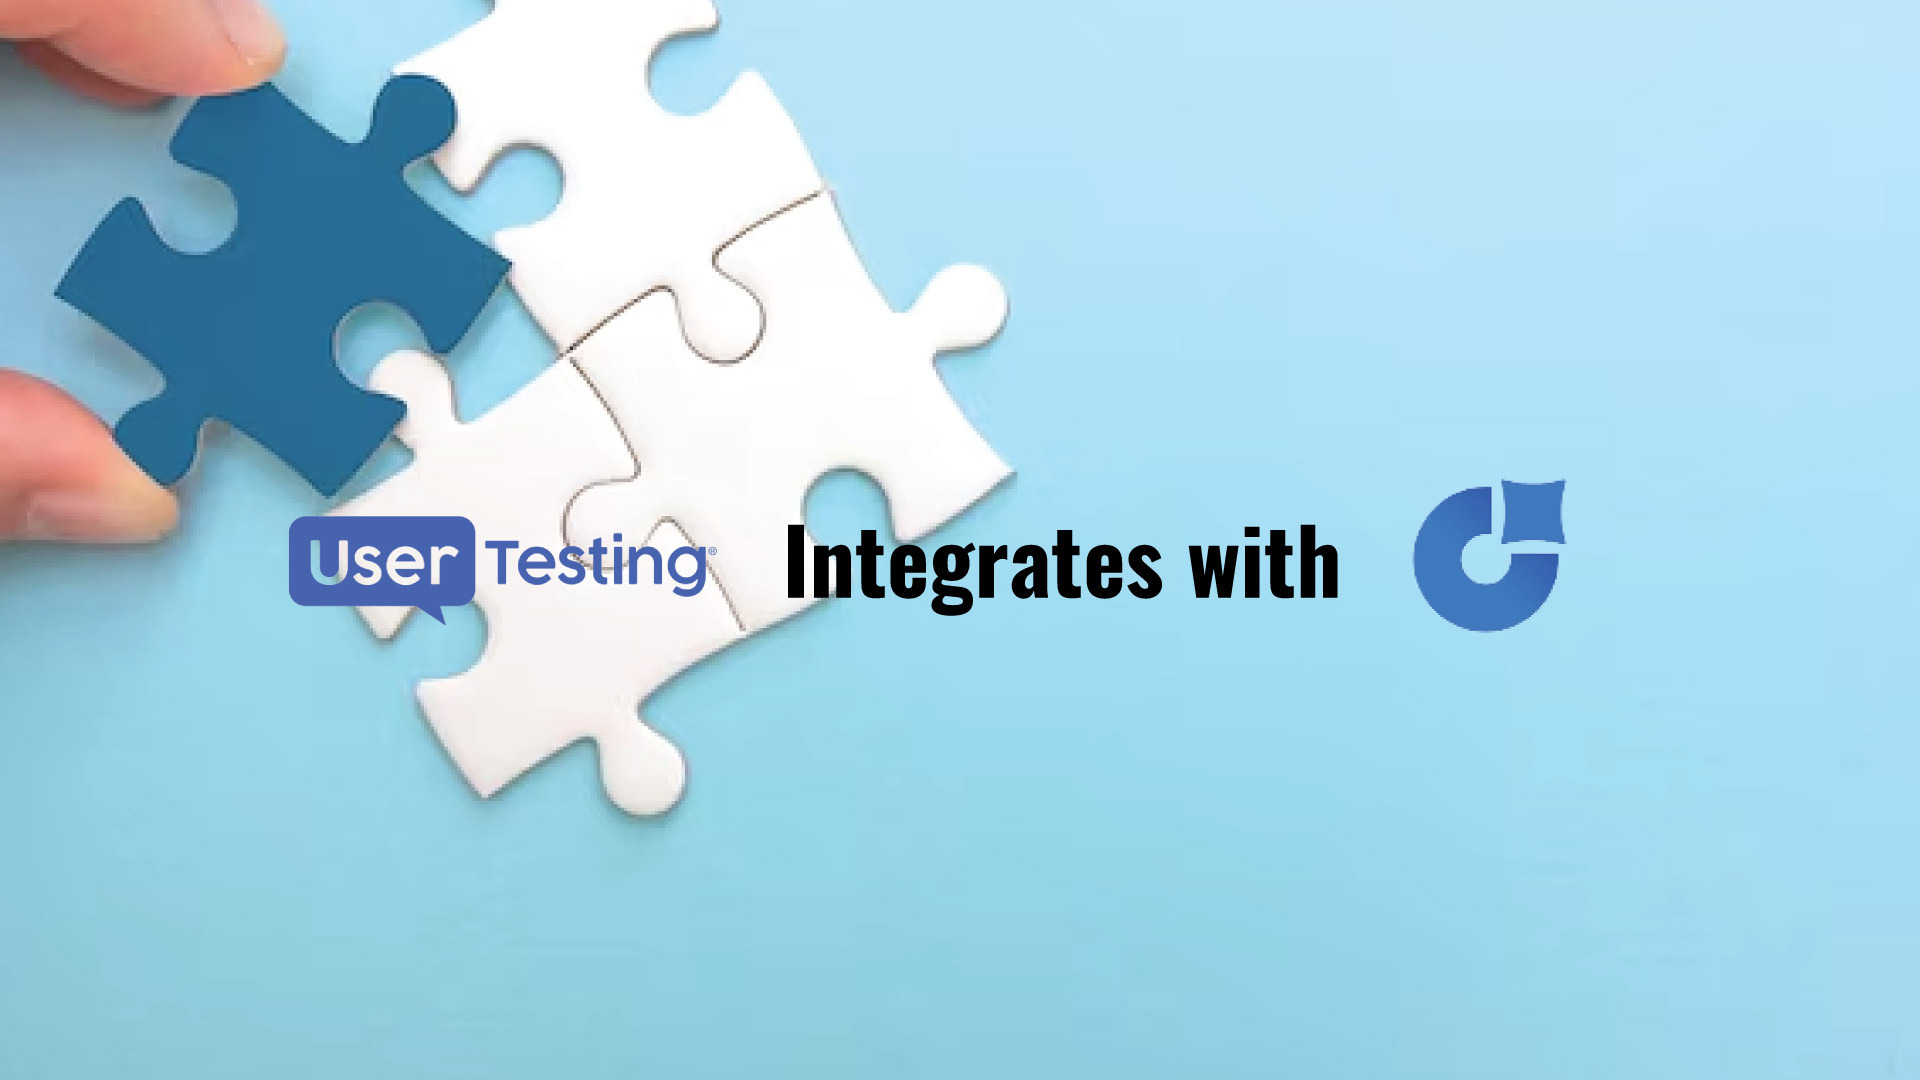 UserTesting Integrates with Atlassian’s Jira Product Discovery, Streamlining the Sharing of Insights to Drive More Collaborative, Customer-Informed Decision Making